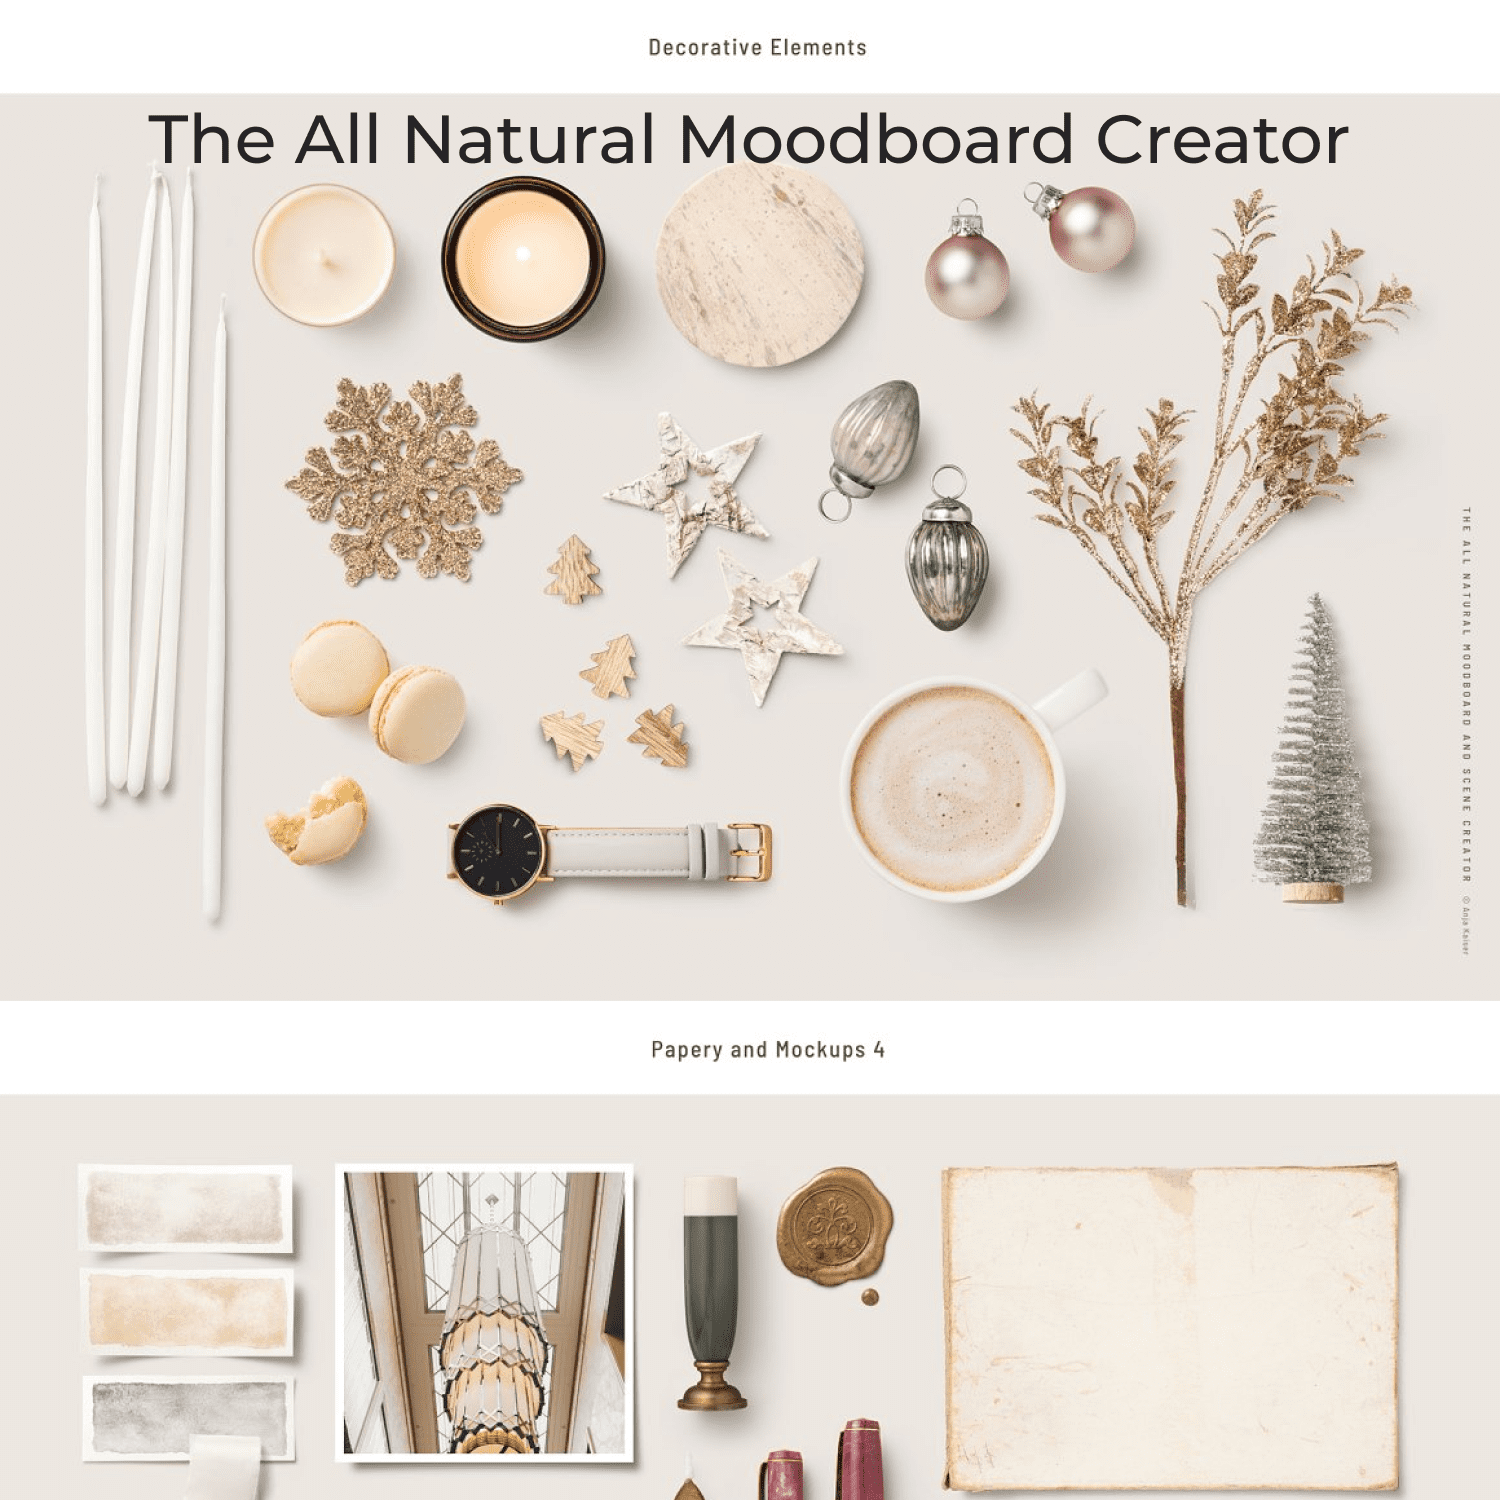 The All Natural Moodboard Creator cover image.